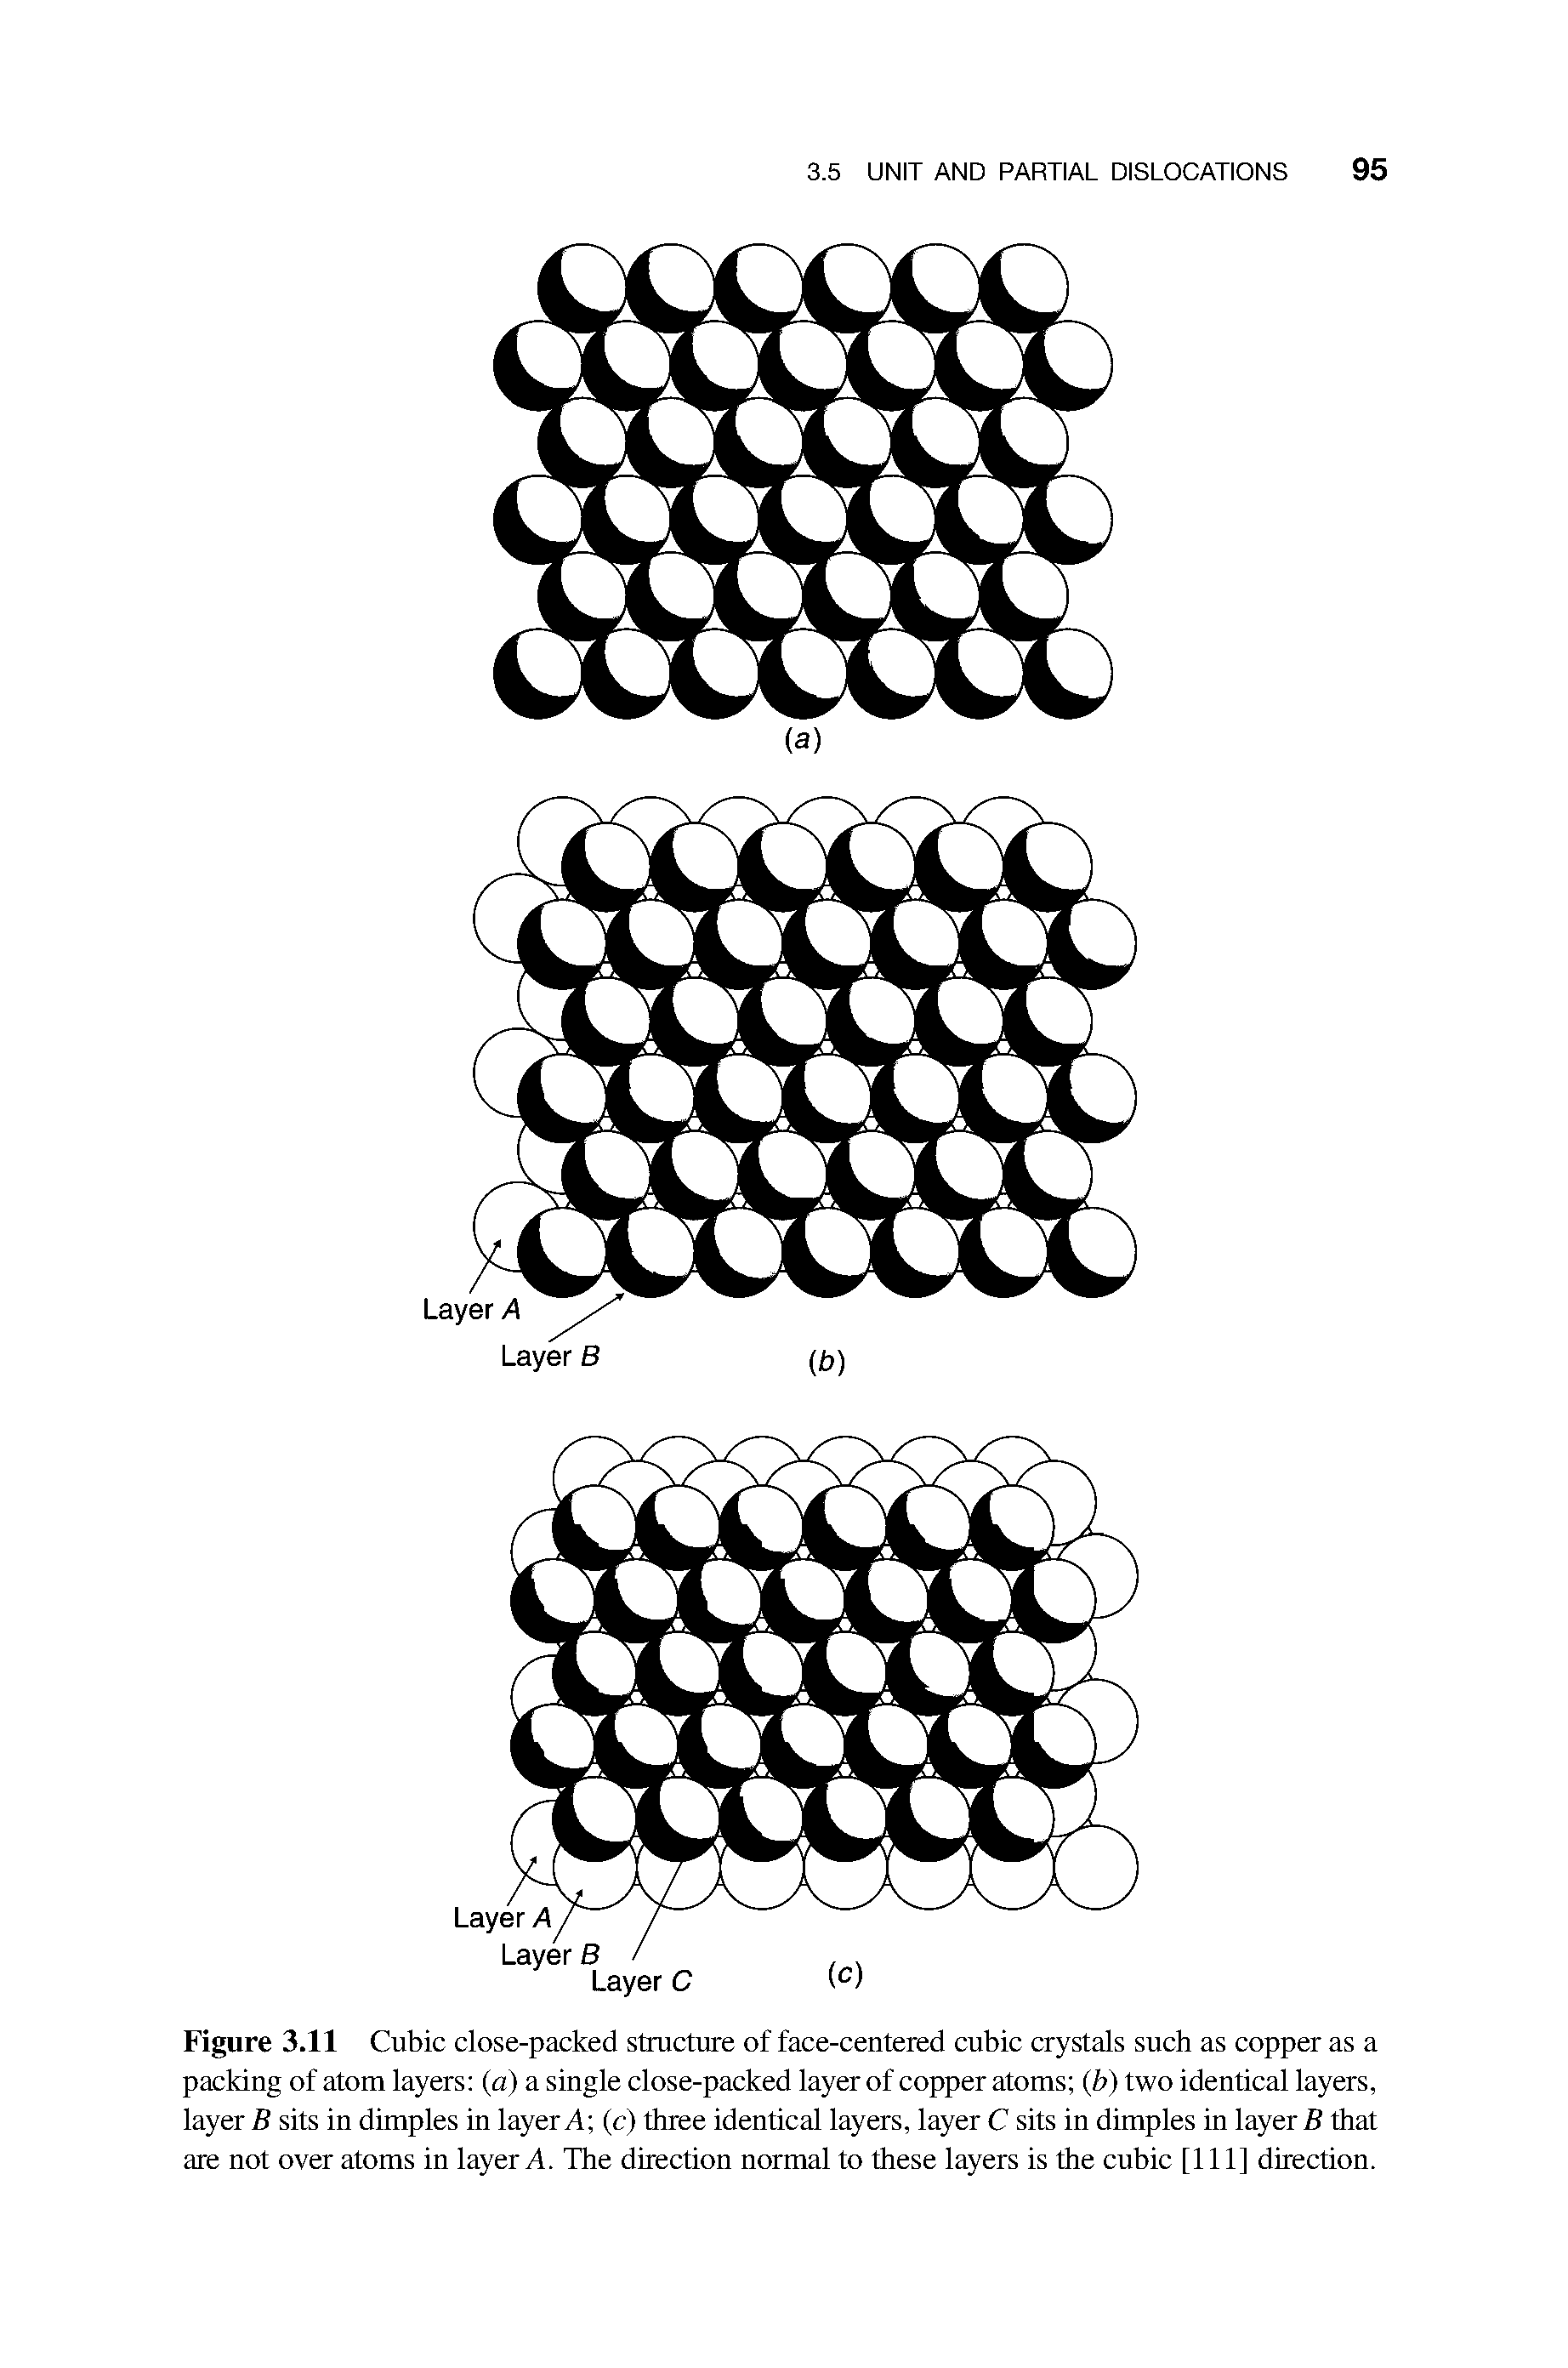 Figure 3.11 Cubic close-packed structure of face-centered cubic crystals such as copper as a packing of atom layers (a) a single close-packed layer of copper atoms (b) two identical layers, layer B sits in dimples in layer A (c) three identical layers, layer C sits in dimples in layer B that are not over atoms in layer A. The direction normal to these layers is the cubic [111] direction.